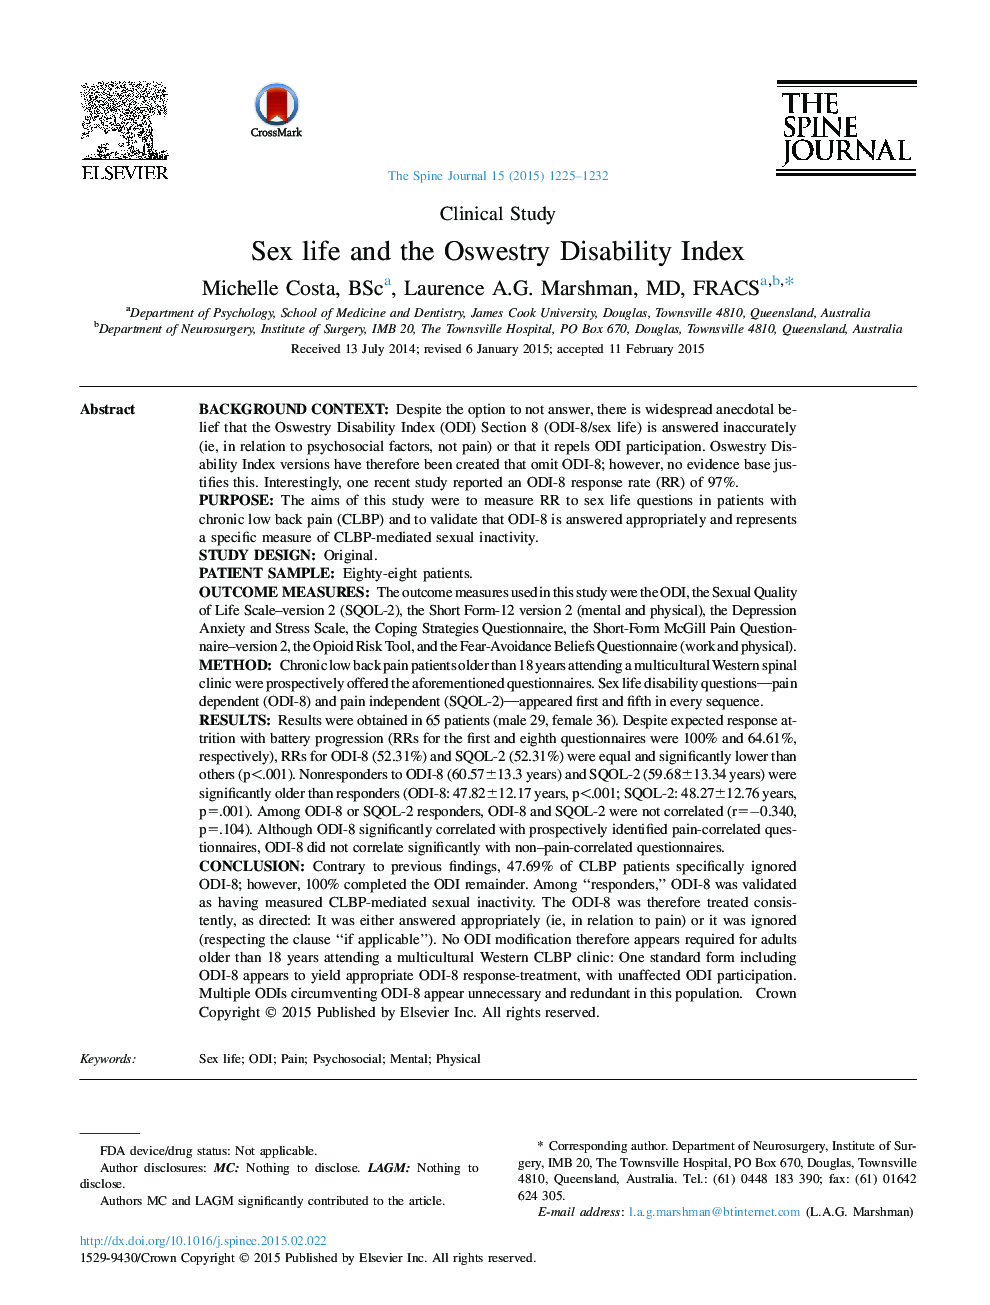 Sex life and the Oswestry Disability Index